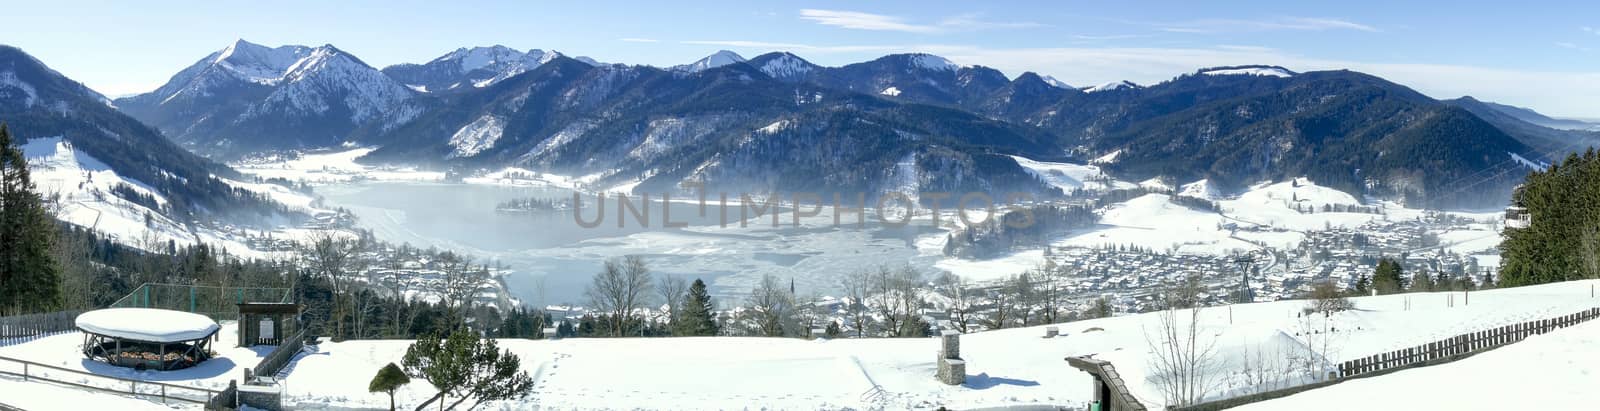 An image of the Schliersee at winter in Bavaria Germany